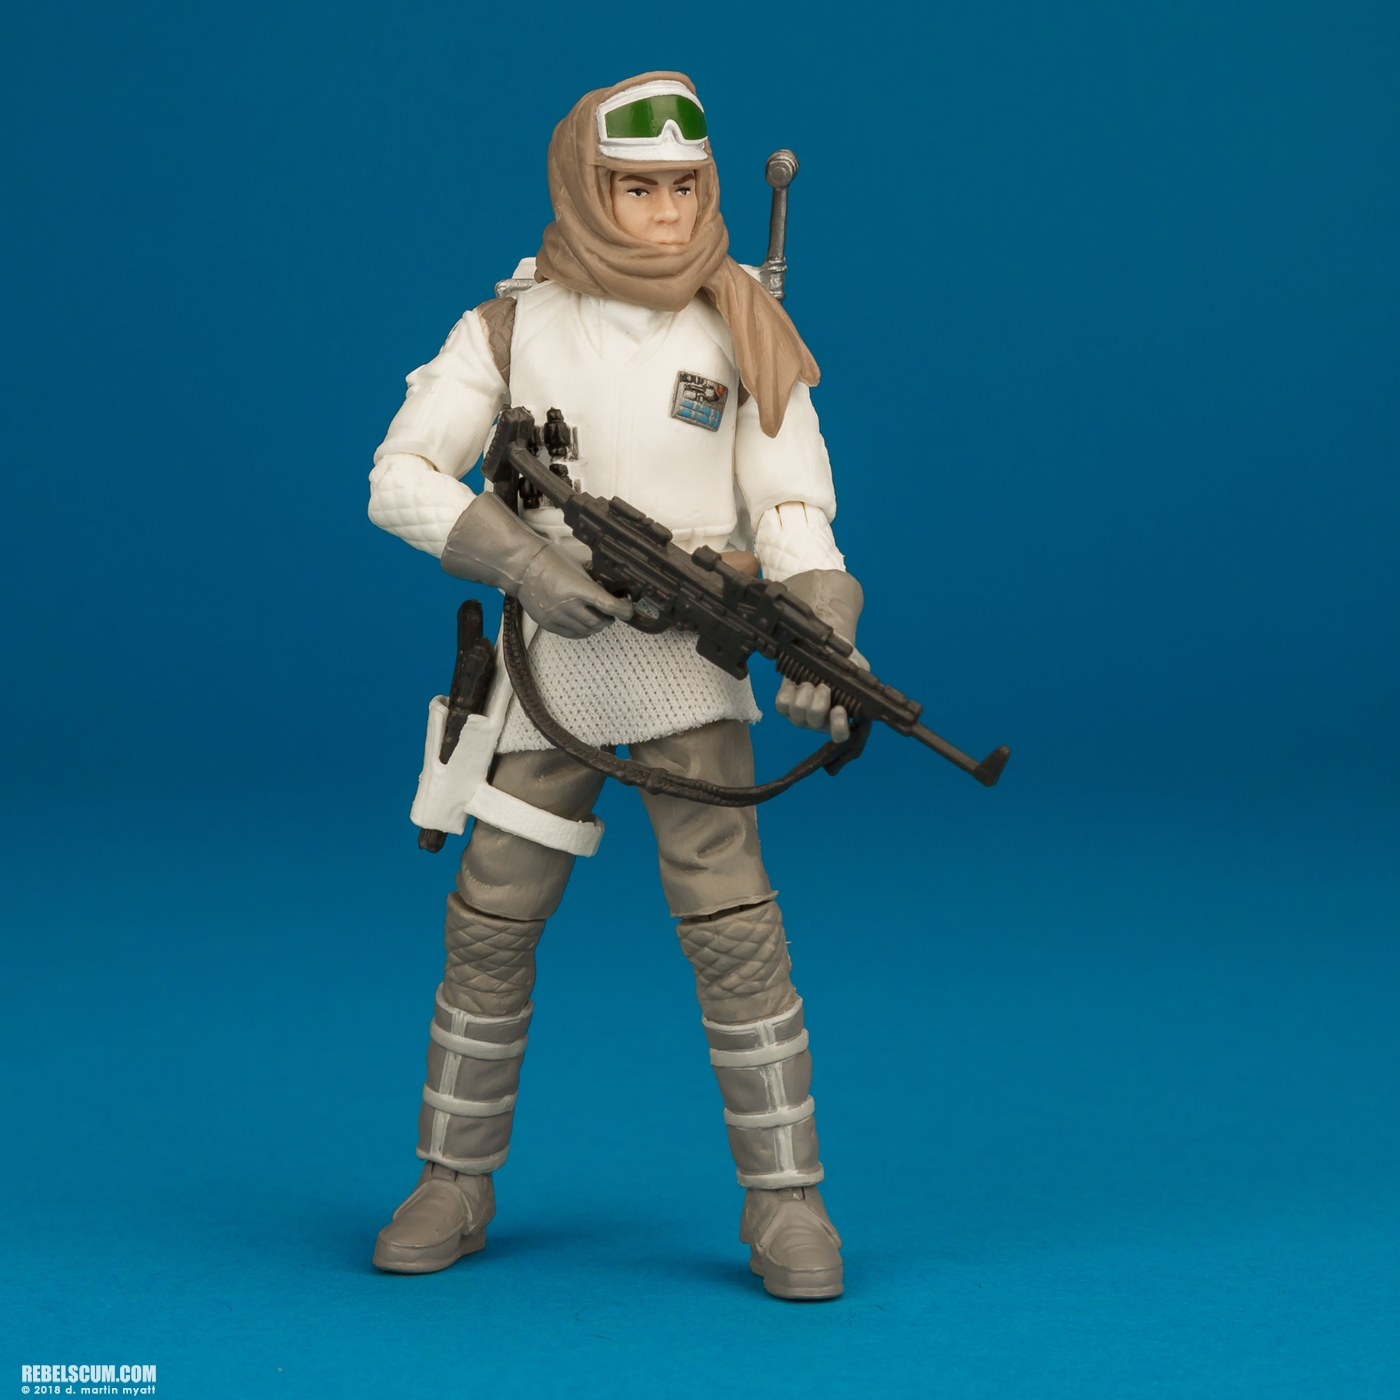 STAR WARS VINTAGE COLLECTION REBEL SOLDIER HOTH VC120 LOOSE COMPLETE